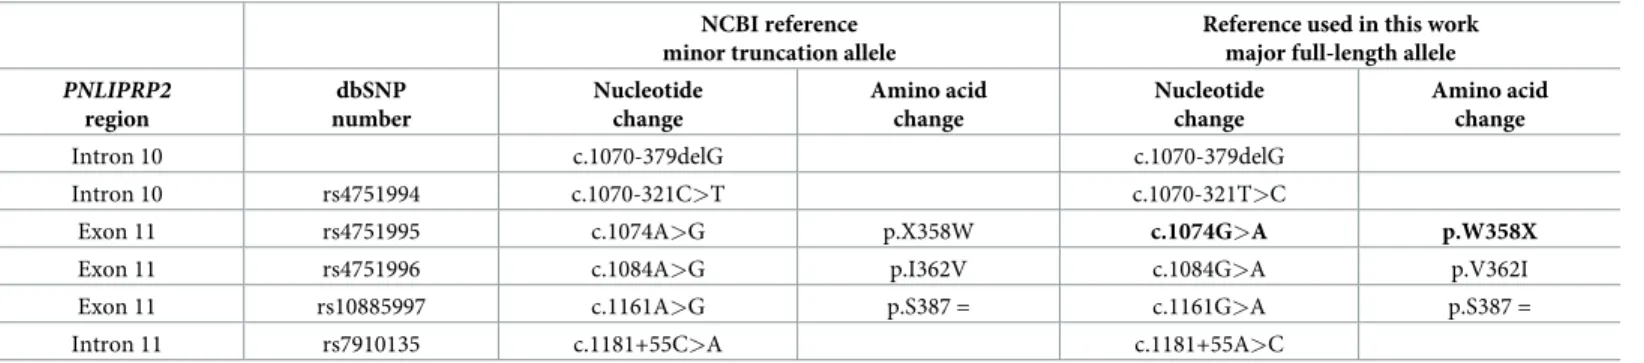 Table 1. Designation of PNLIPRP2 variants with respect to the NCBI reference sequence corresponding to the minor truncation allele and the full-length major allele used as the reference in this study.